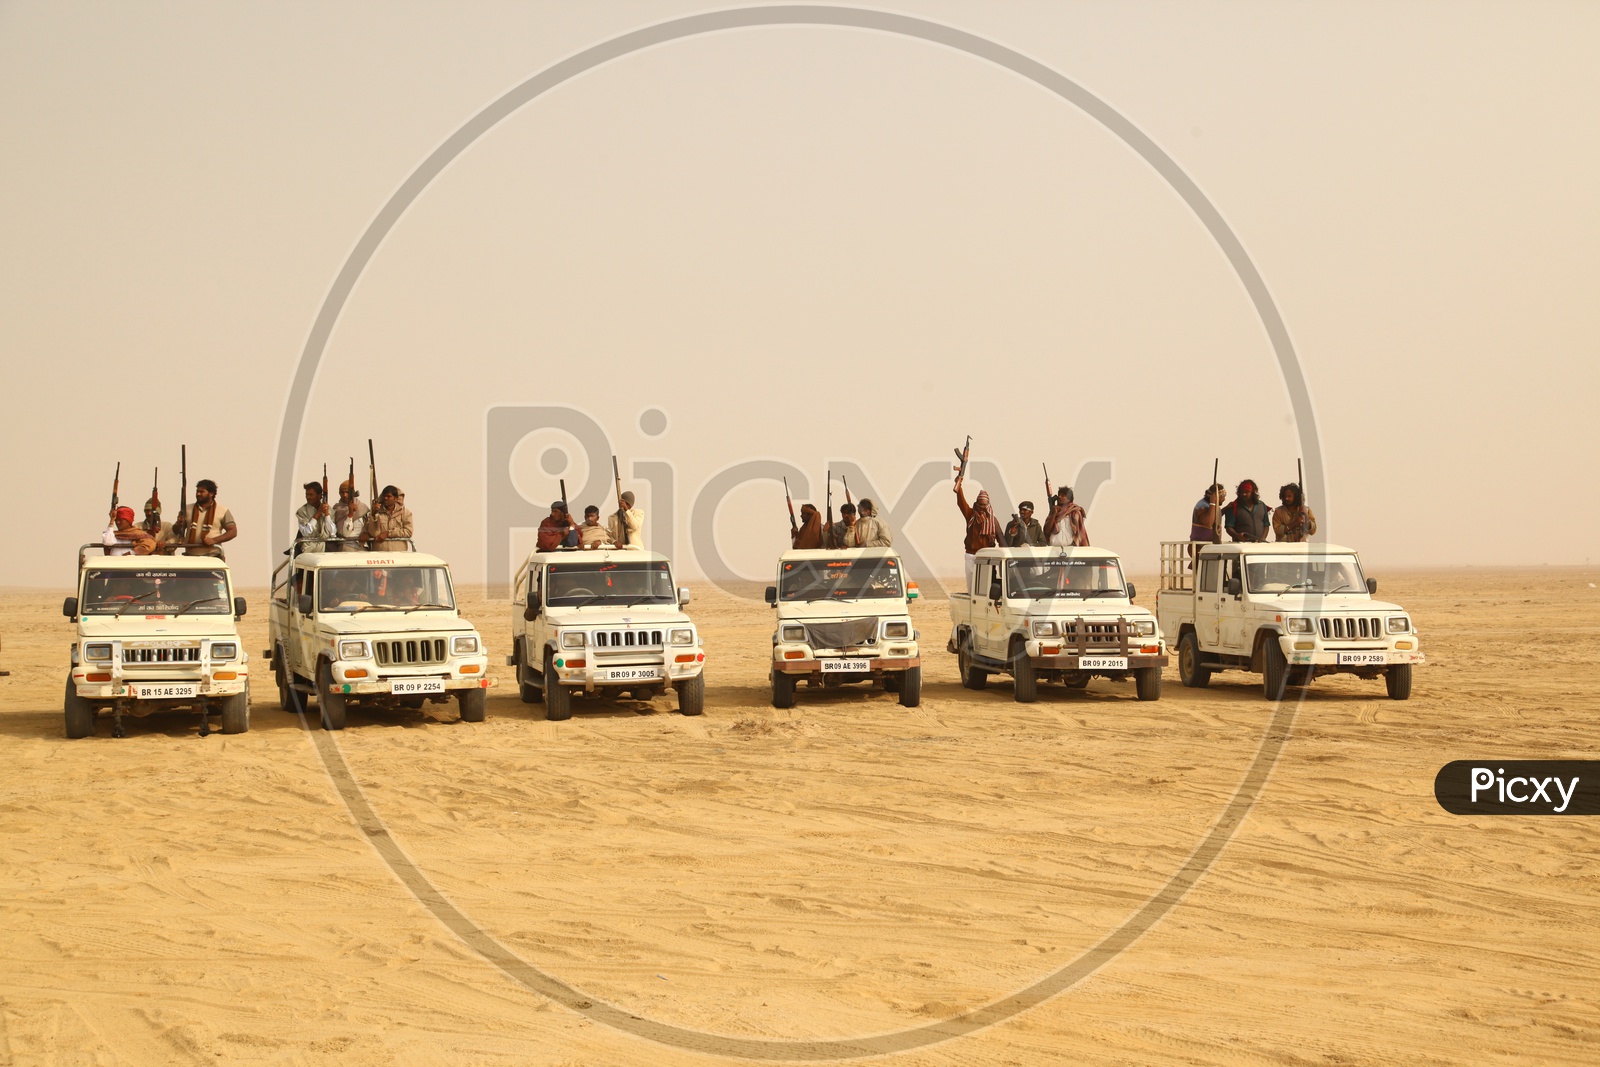 vehicles with people moving in desert